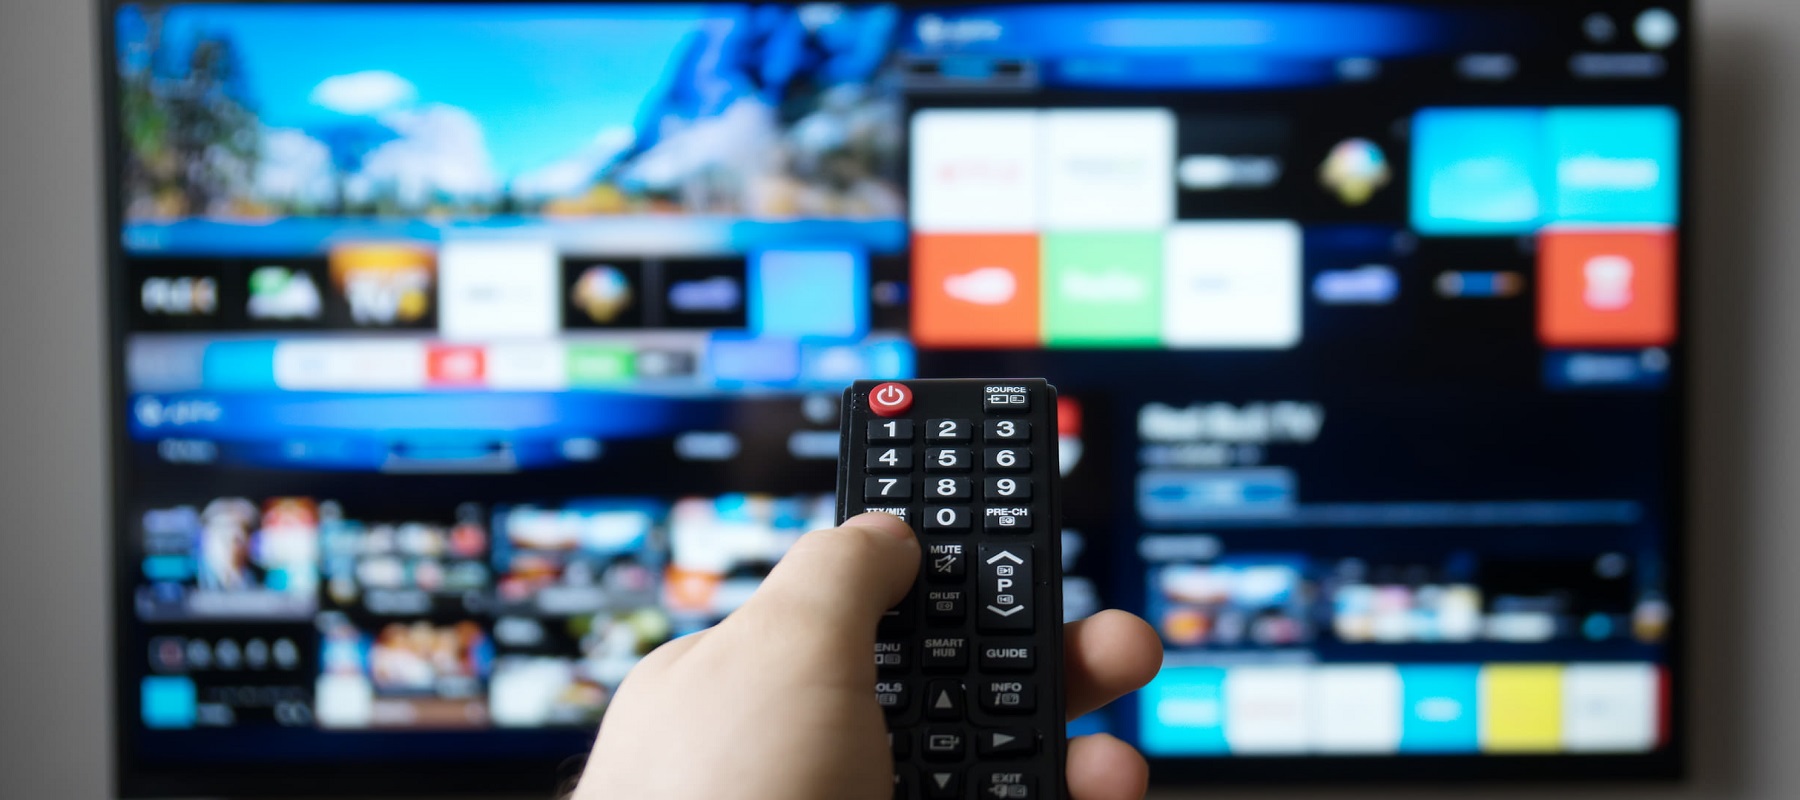 Connected TV advertising drives revenue and reaches new audiences easily, report